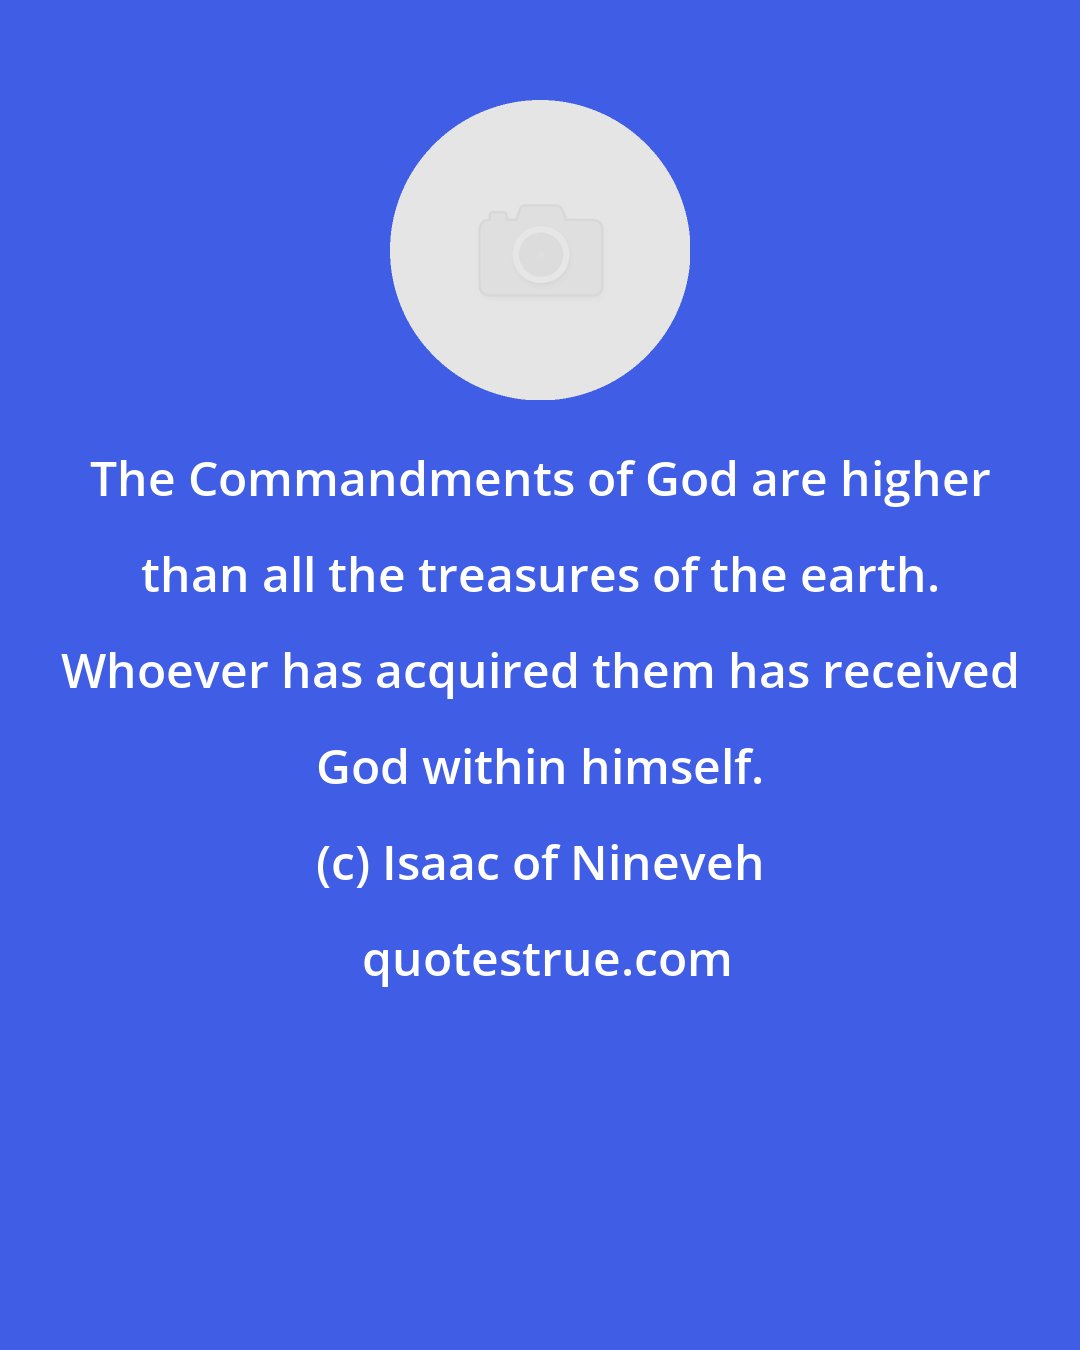 Isaac of Nineveh: The Commandments of God are higher than all the treasures of the earth. Whoever has acquired them has received God within himself.